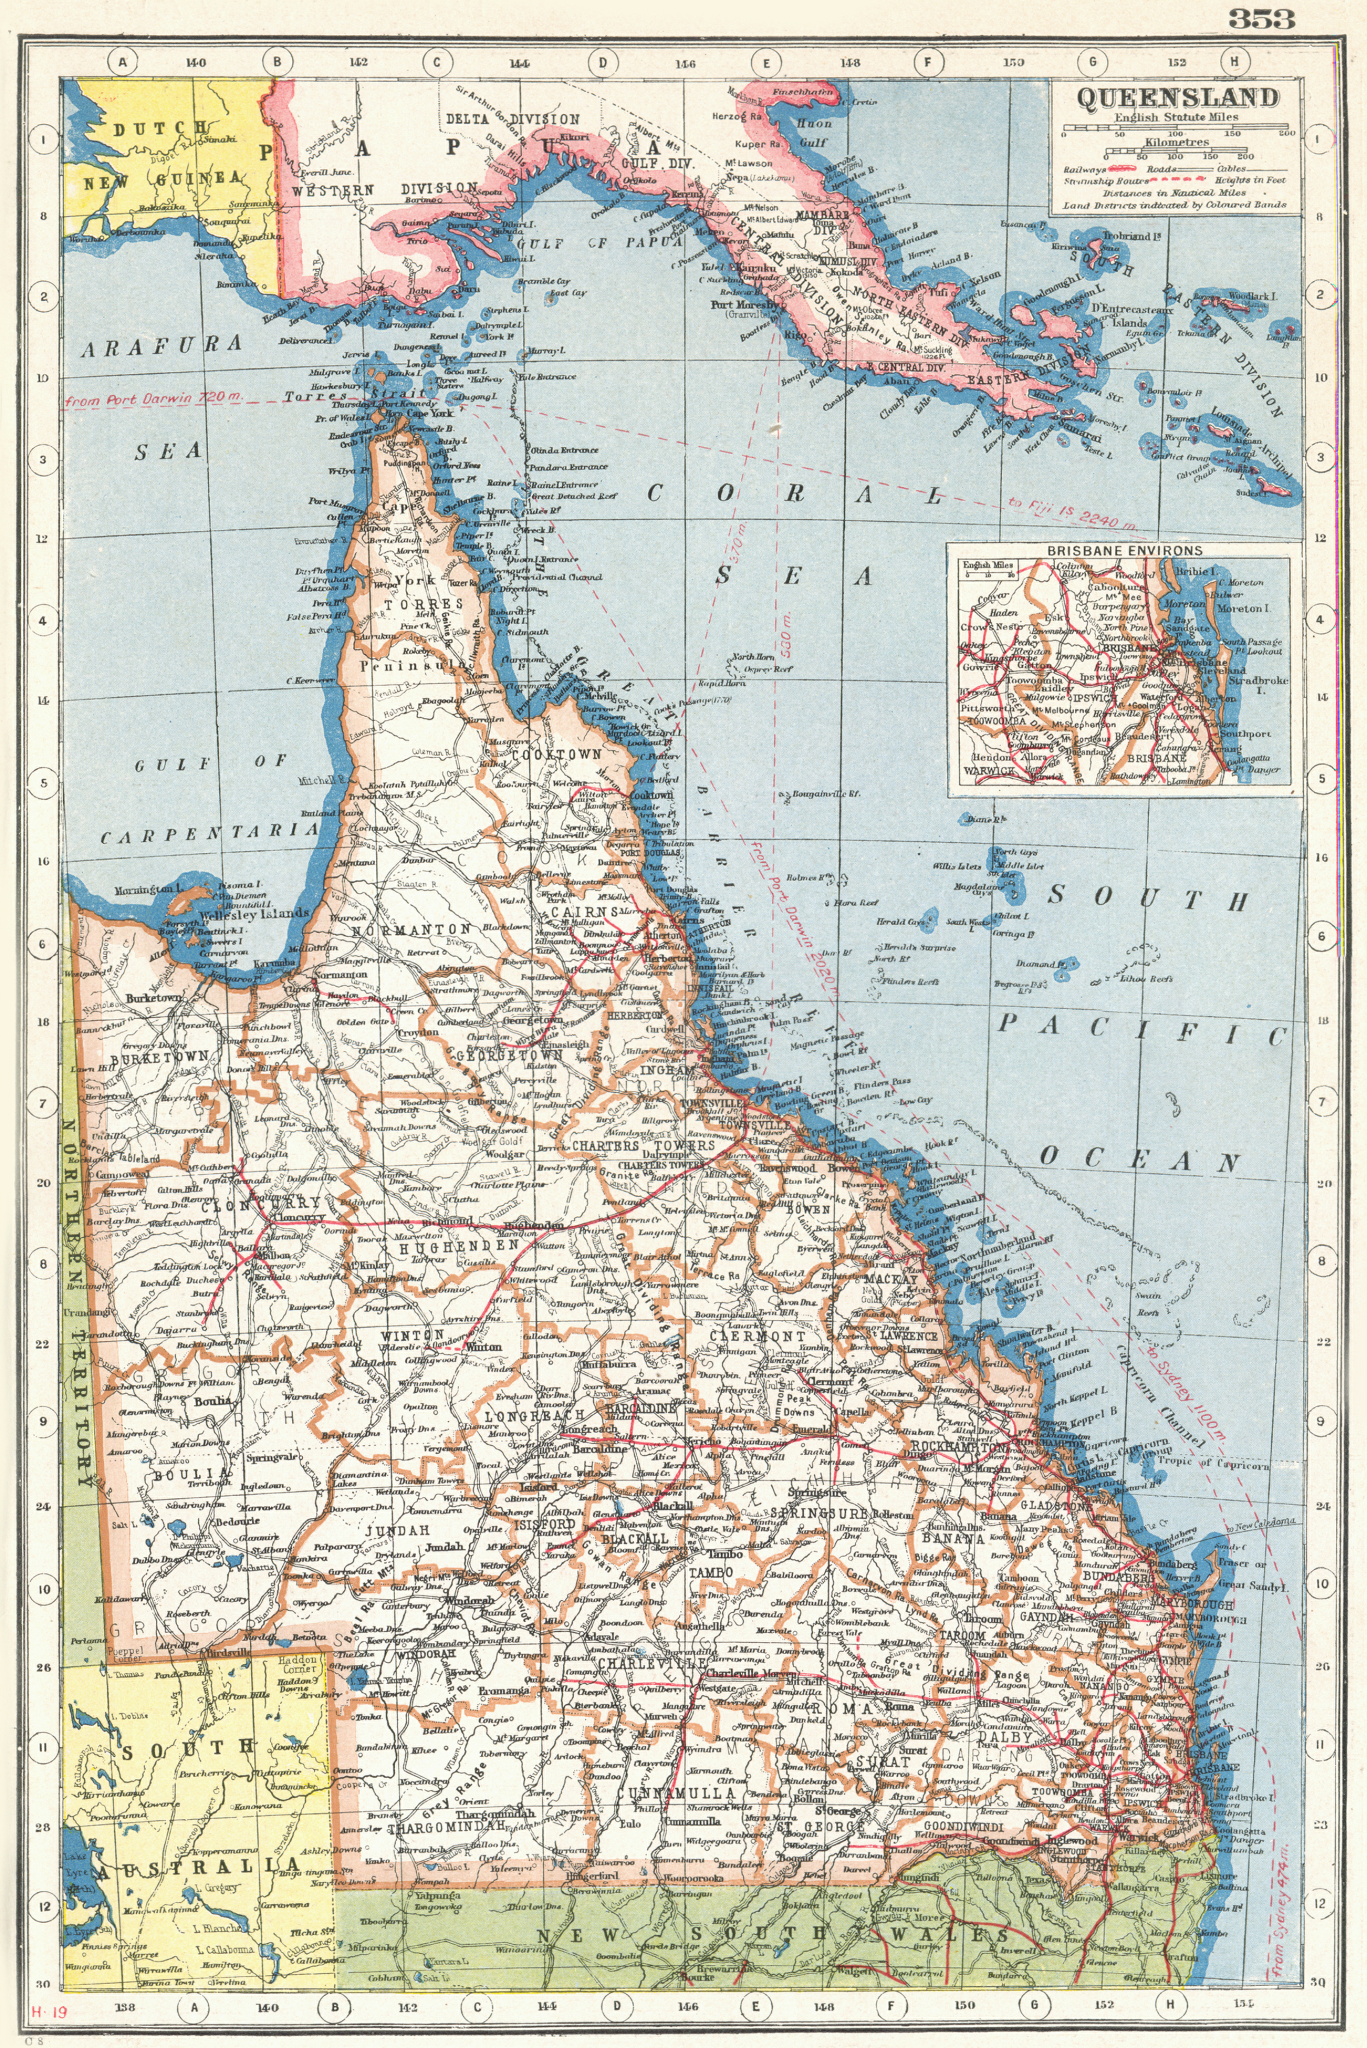 Associate Product QUEENSLAND. State map showing counties. Inset Brisbane Environs 1920 old